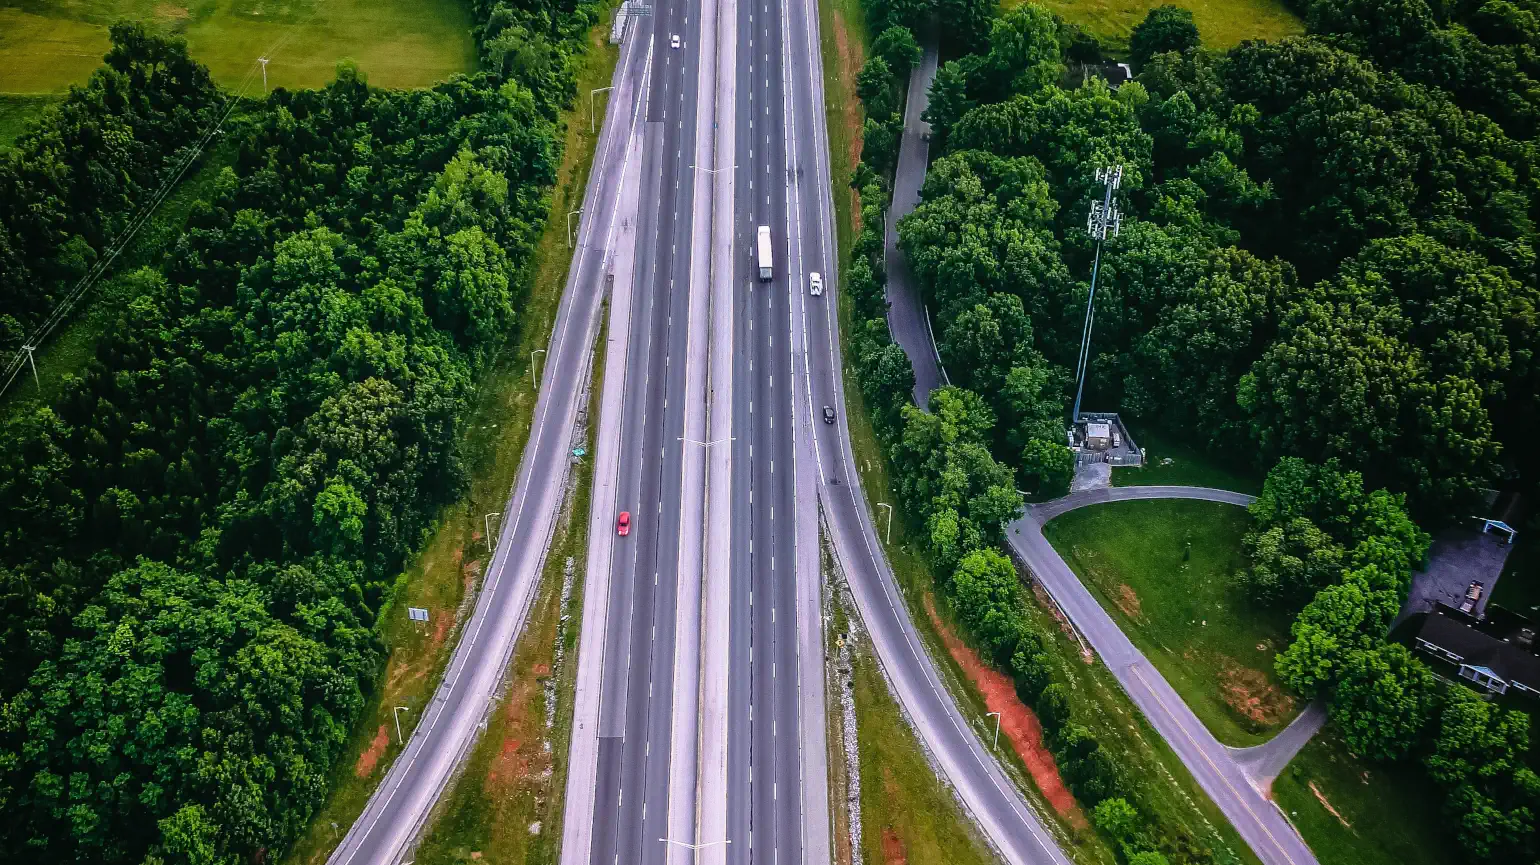 Divided interstate highway in lush green trees and fields